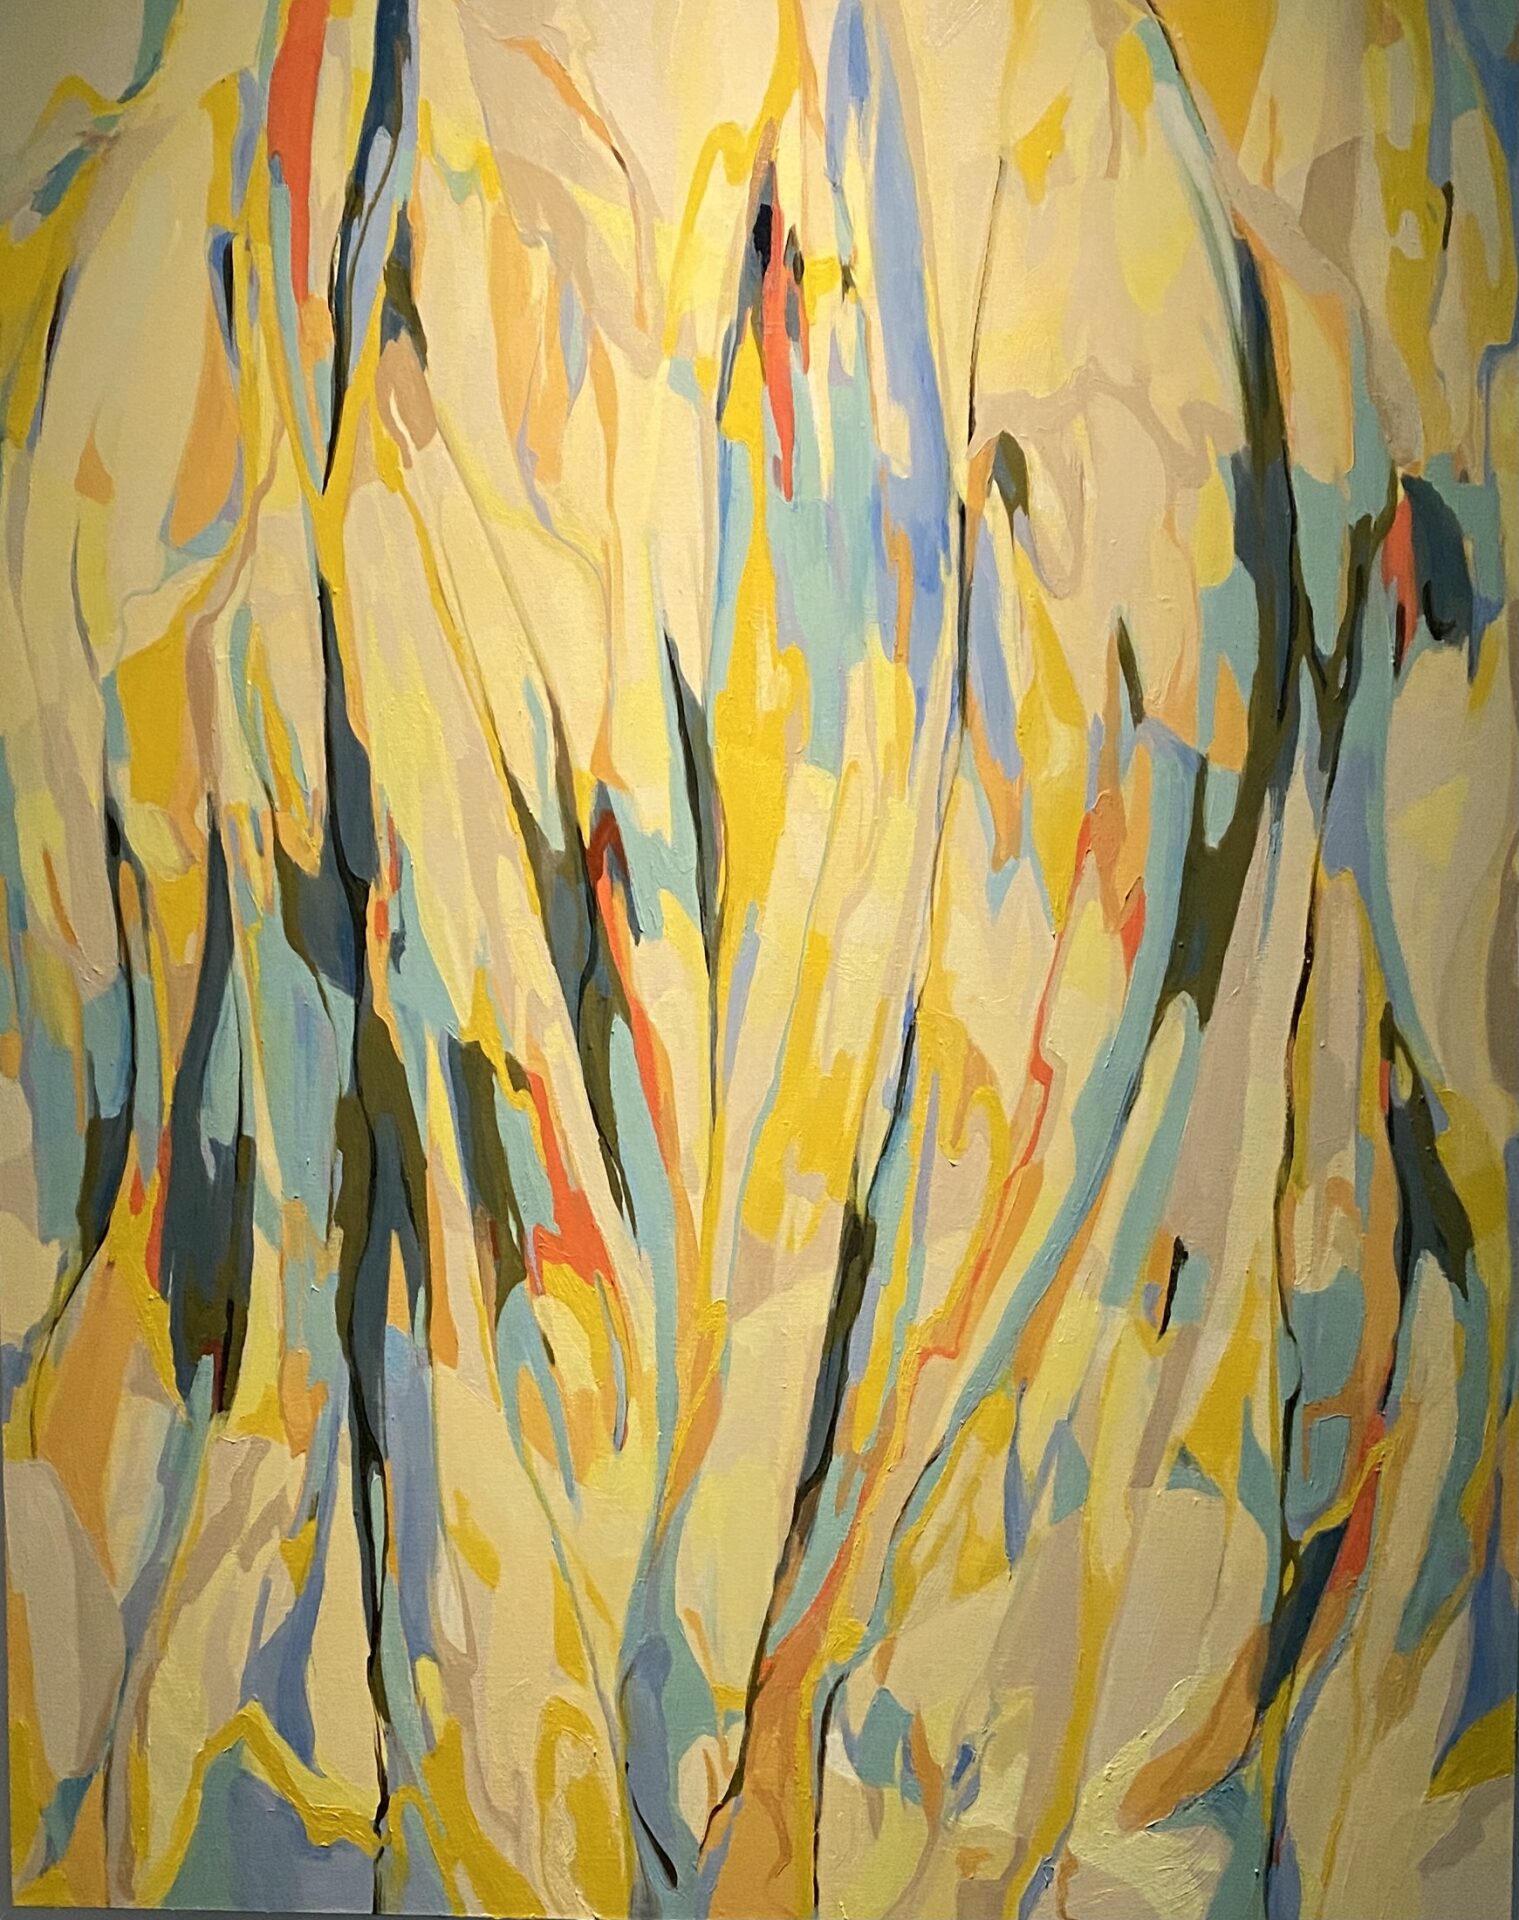 Chased by Sunlight
60"H x 48”W Oil on Canvas